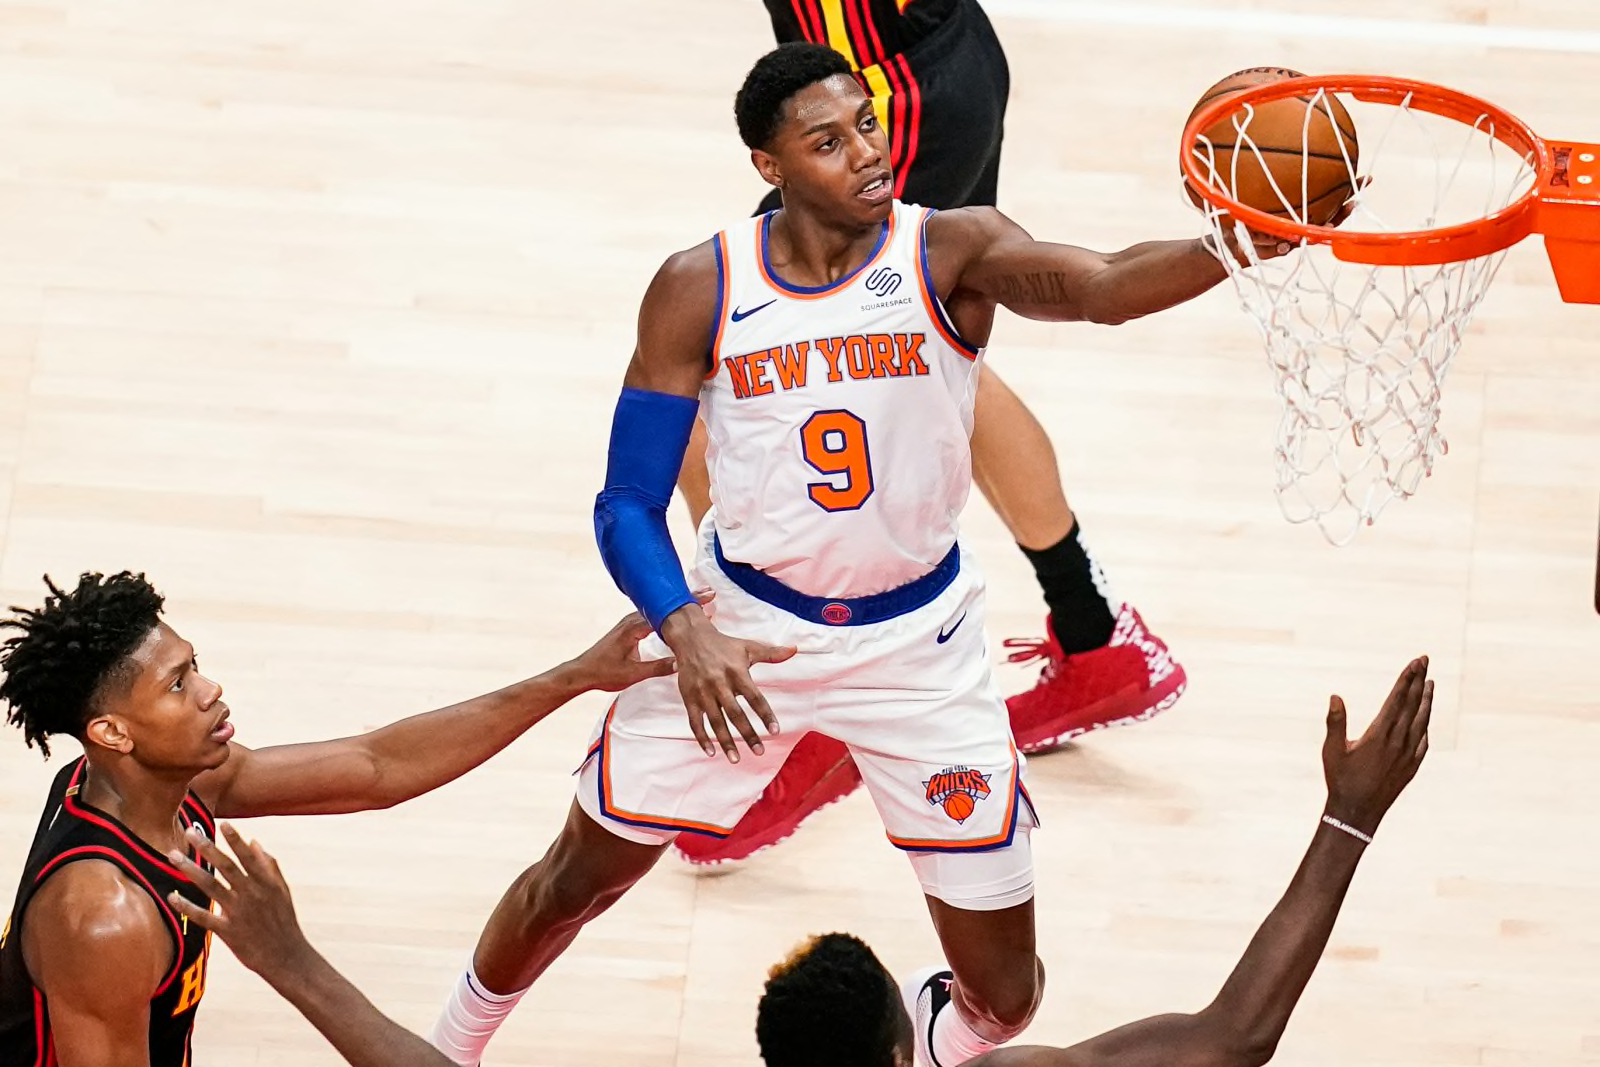 Knicks 128, Pelicans 106: “What a great addition JHart has been